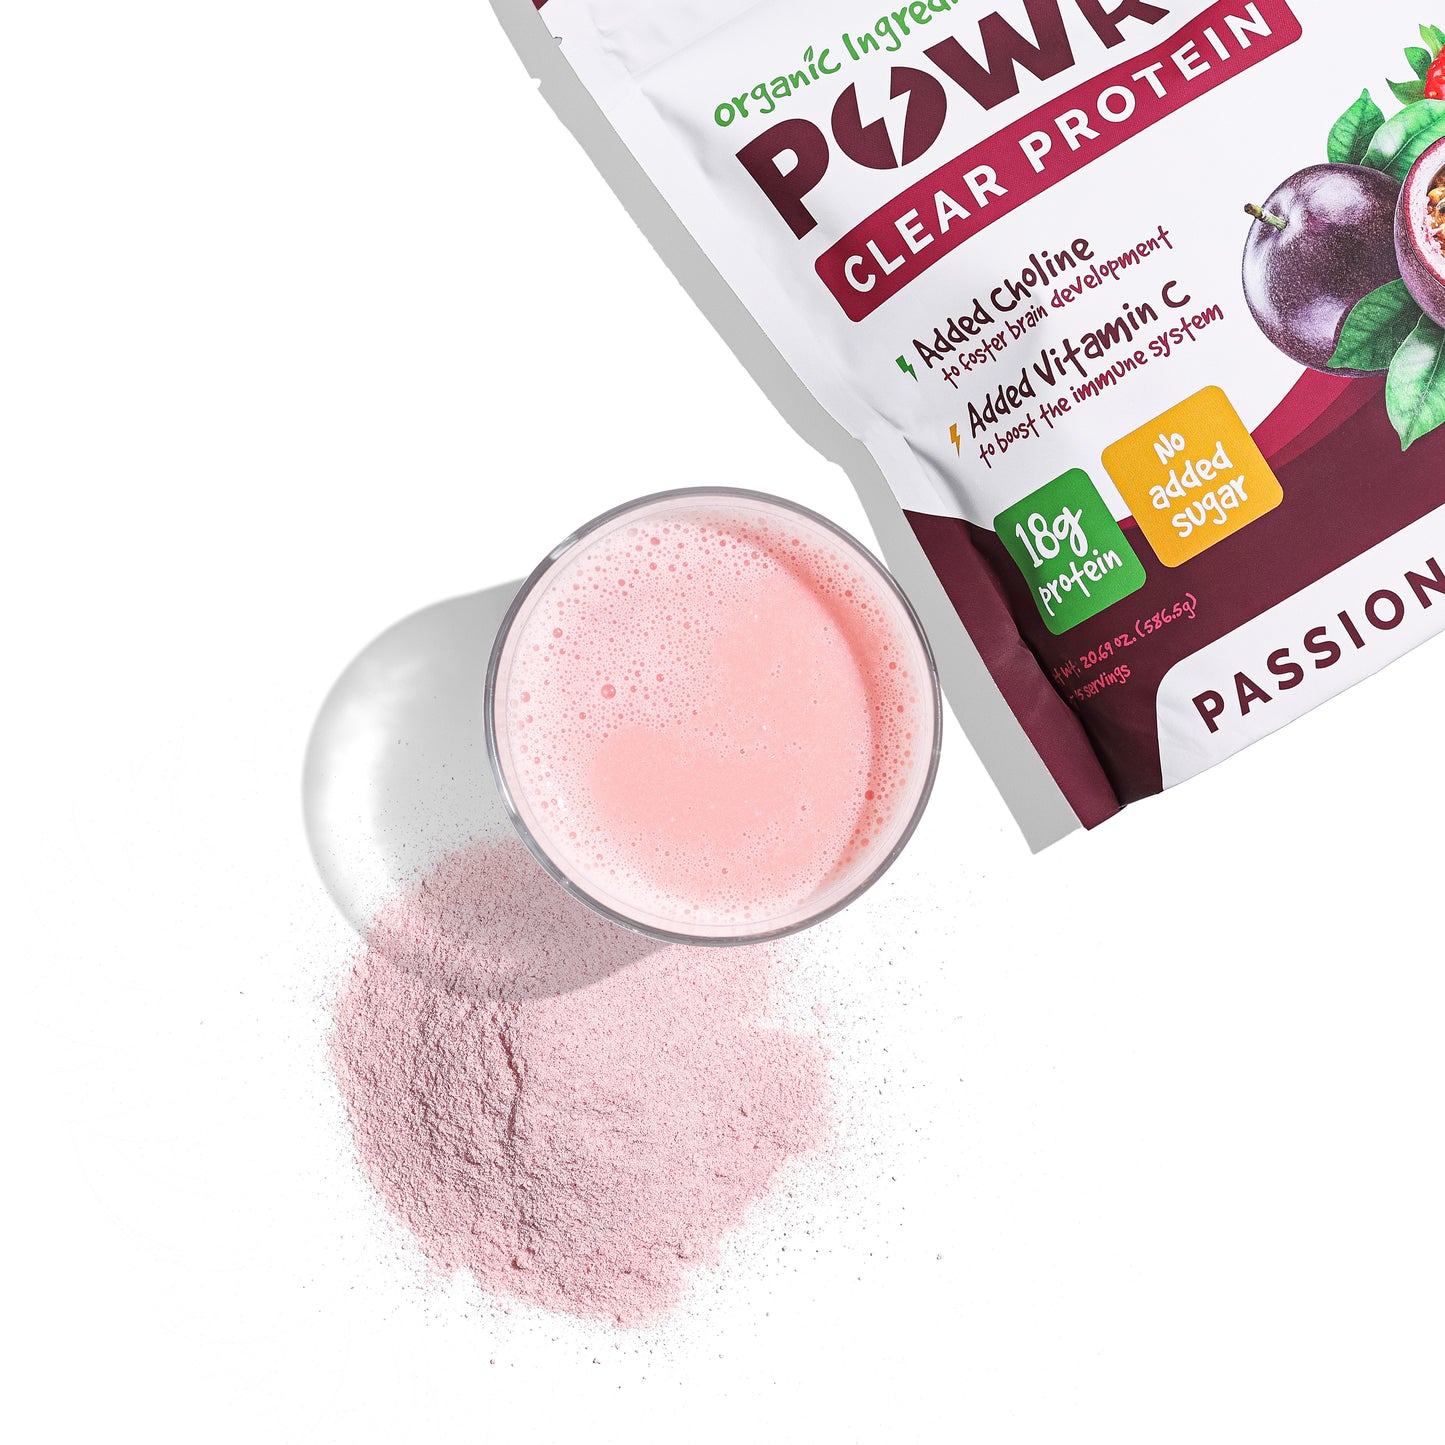 Passionberry Clear Protein Powder